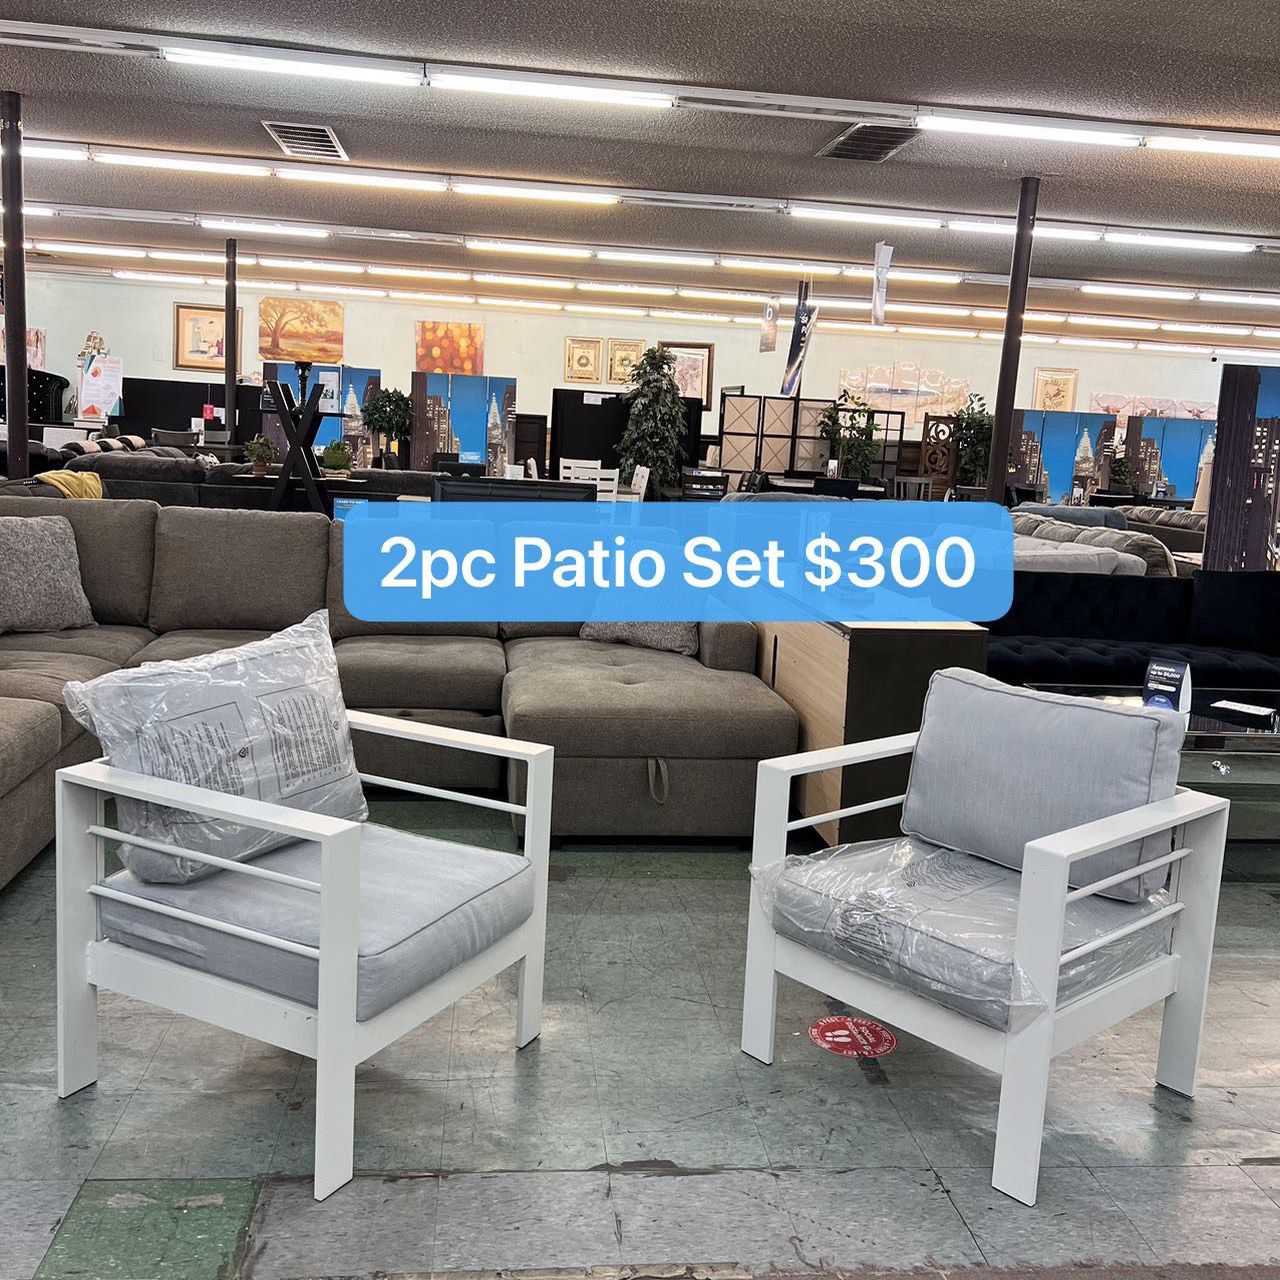 🚚Hot Deal🚚Deep Seat Aluminum Patio Chair $150 Each, Delivery Available 